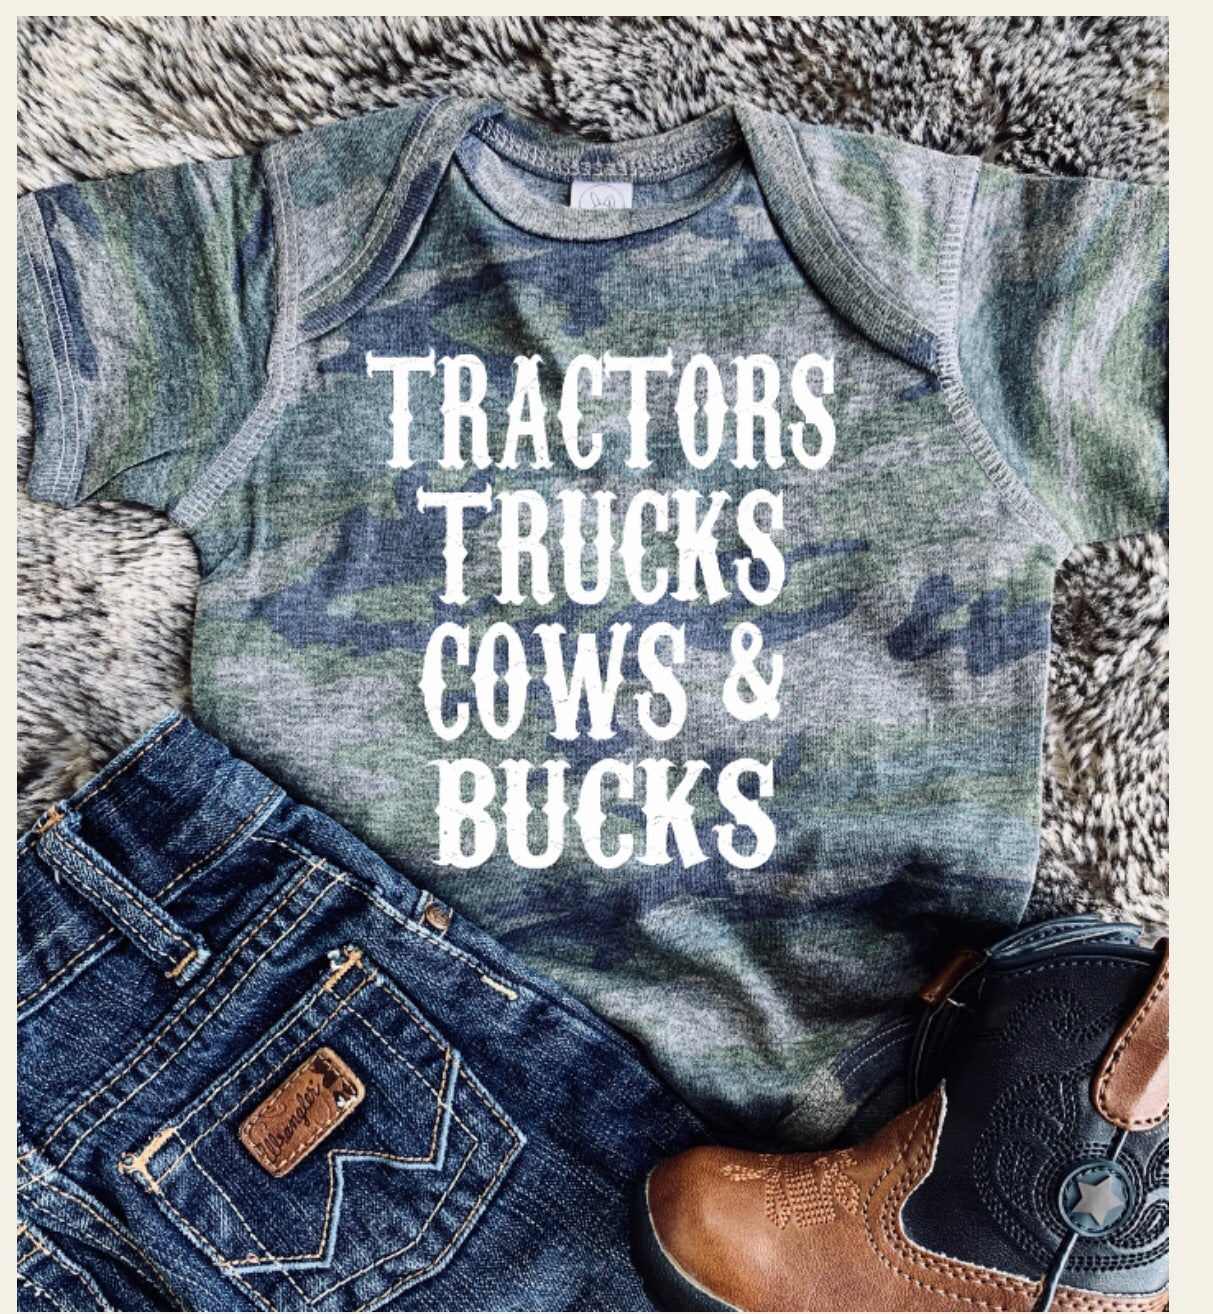 Tractors Trucks Cows & Bucks - Forever Western Boutique